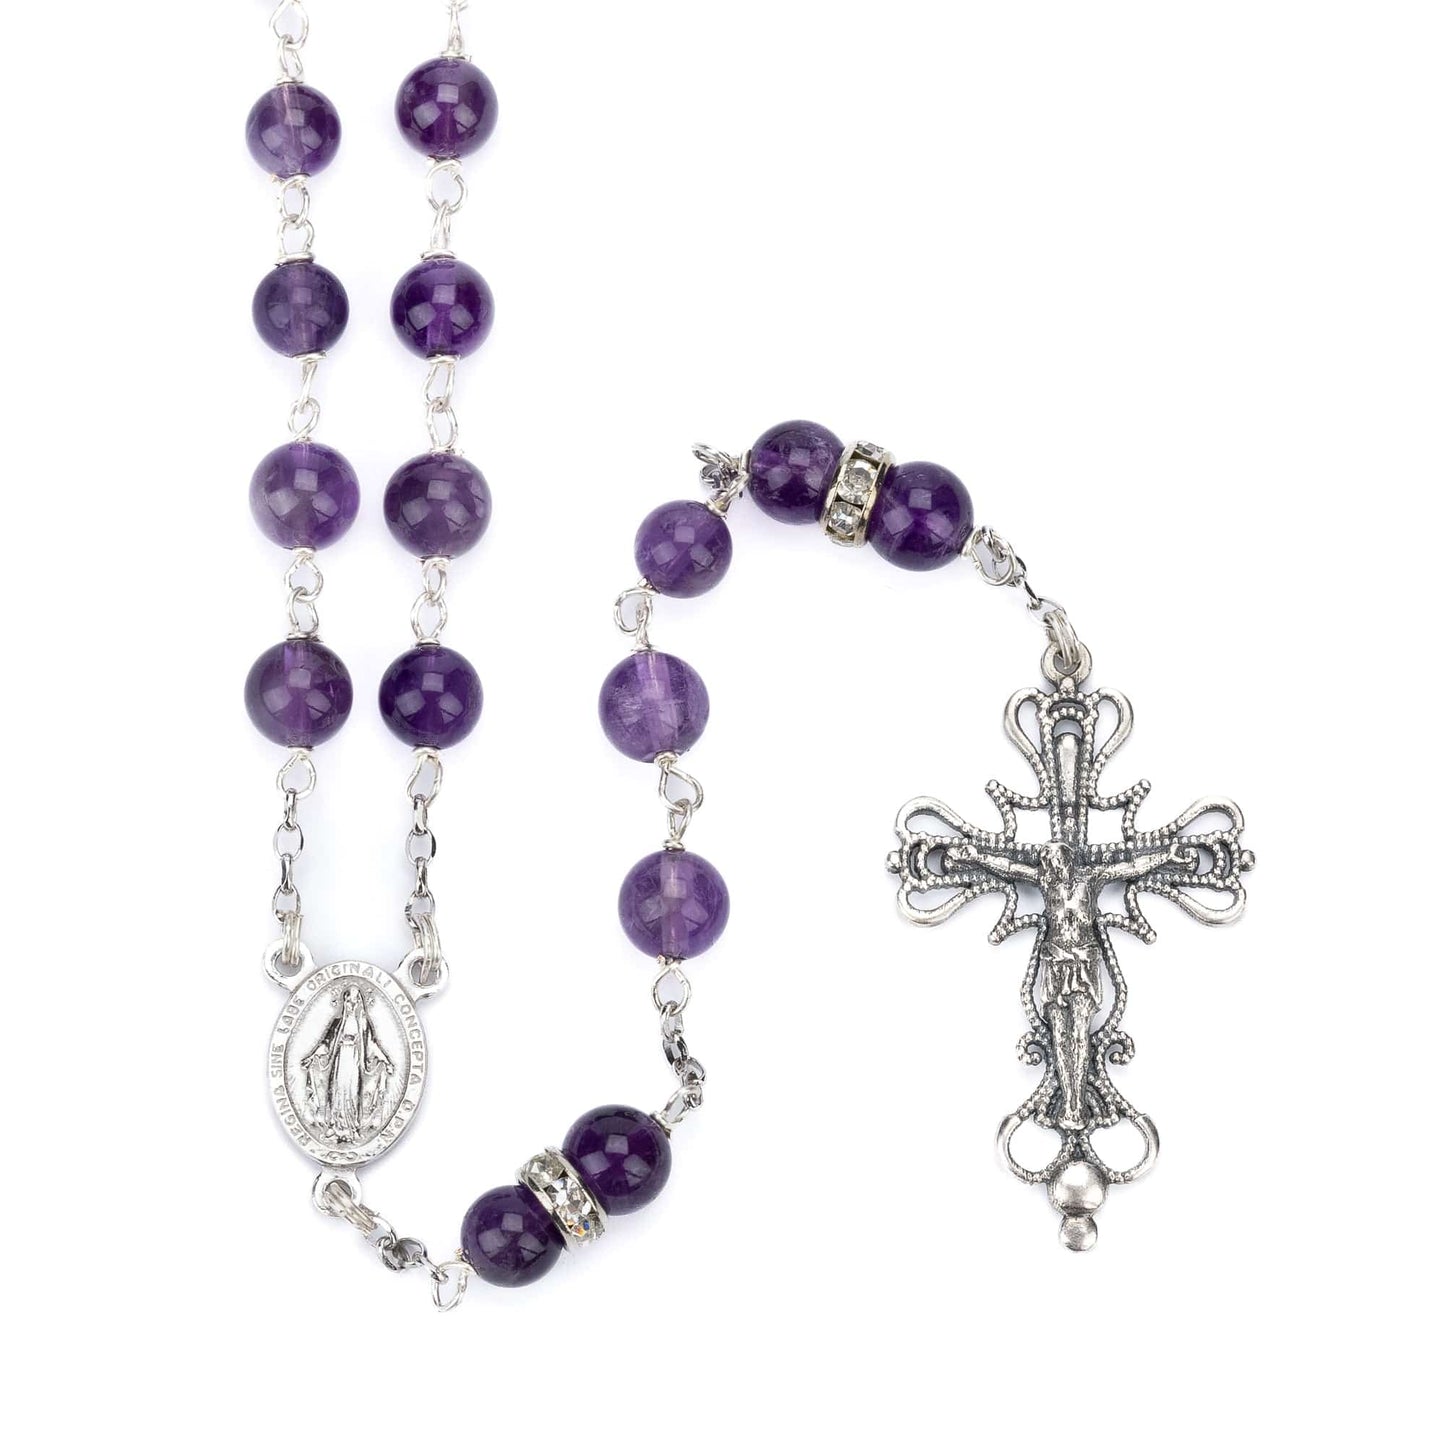 MONDO CATTOLICO Prayer Beads AMETHIST STERLING SILVER ROSARY